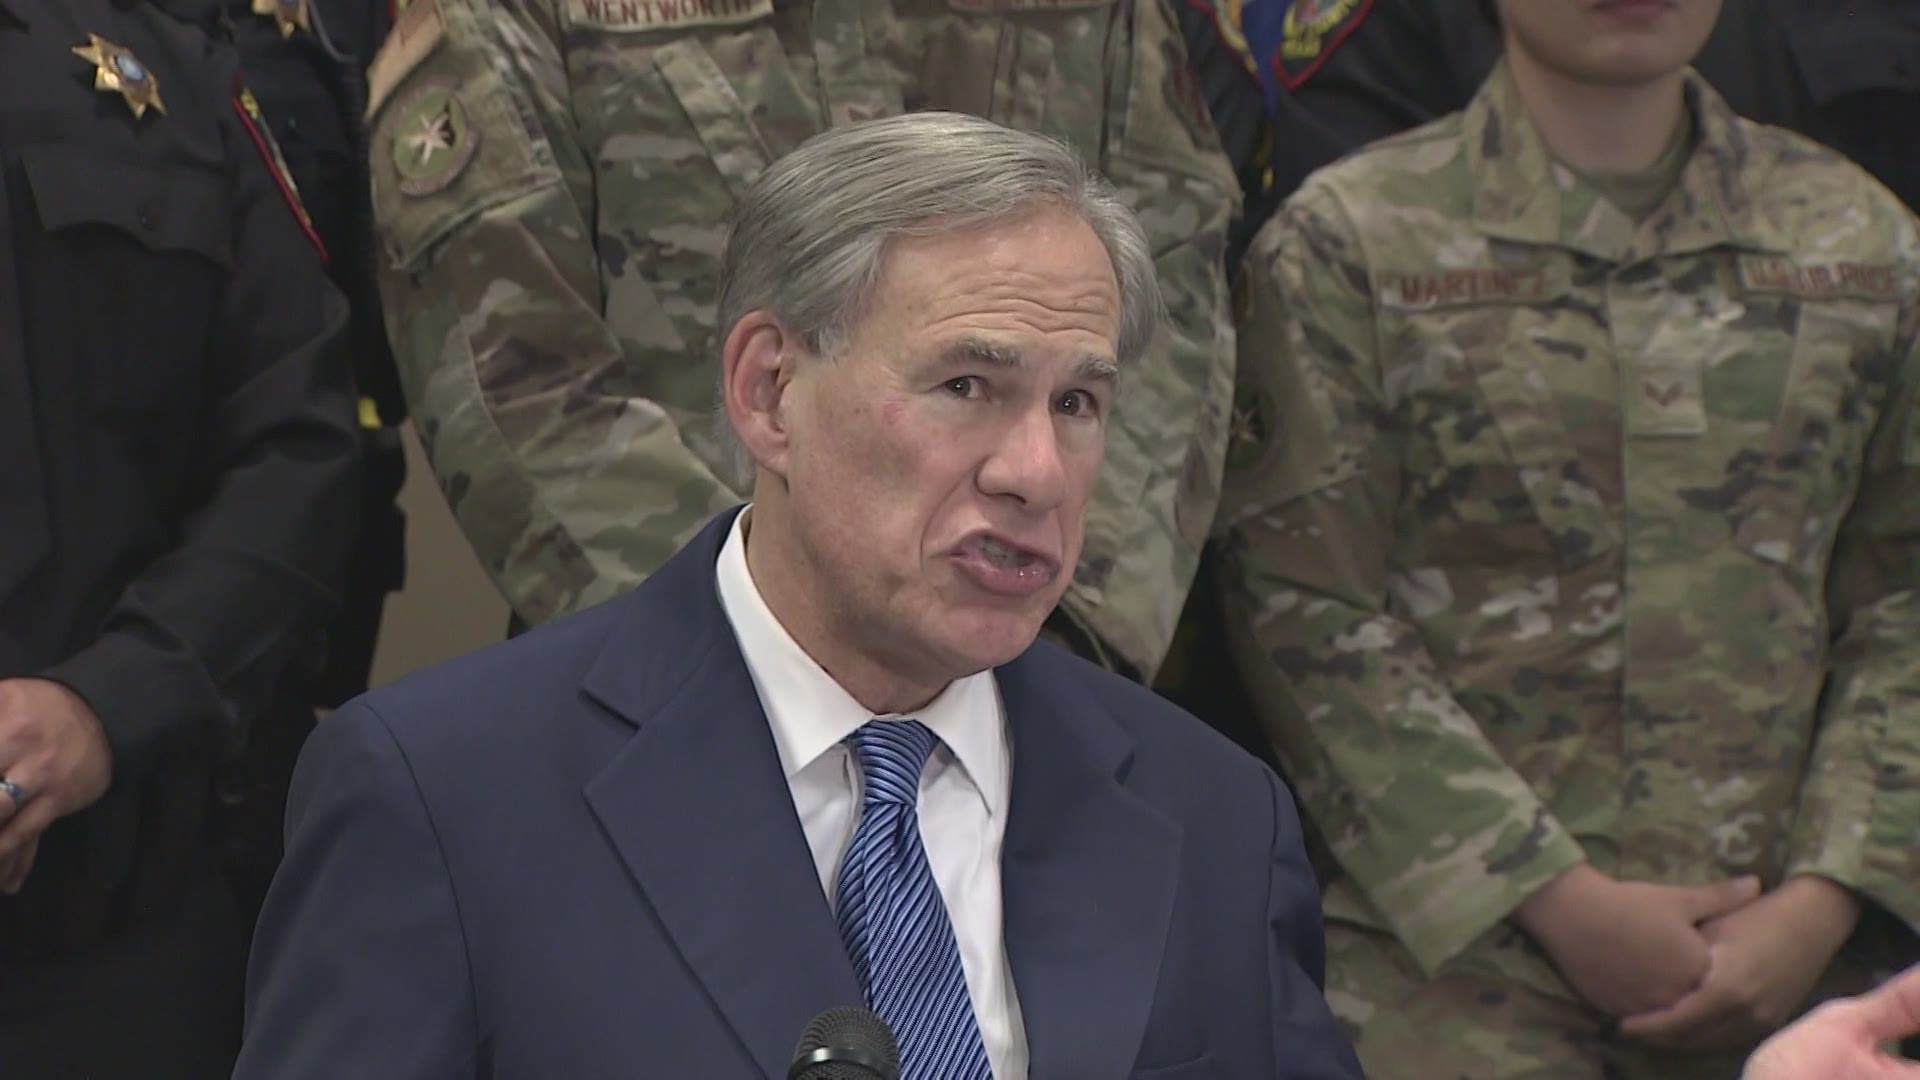 Gov. Abbott discussed the concern for drug overdoses related to fentanyl and how state entities are trying to curb the problem of drug smuggling over the border.